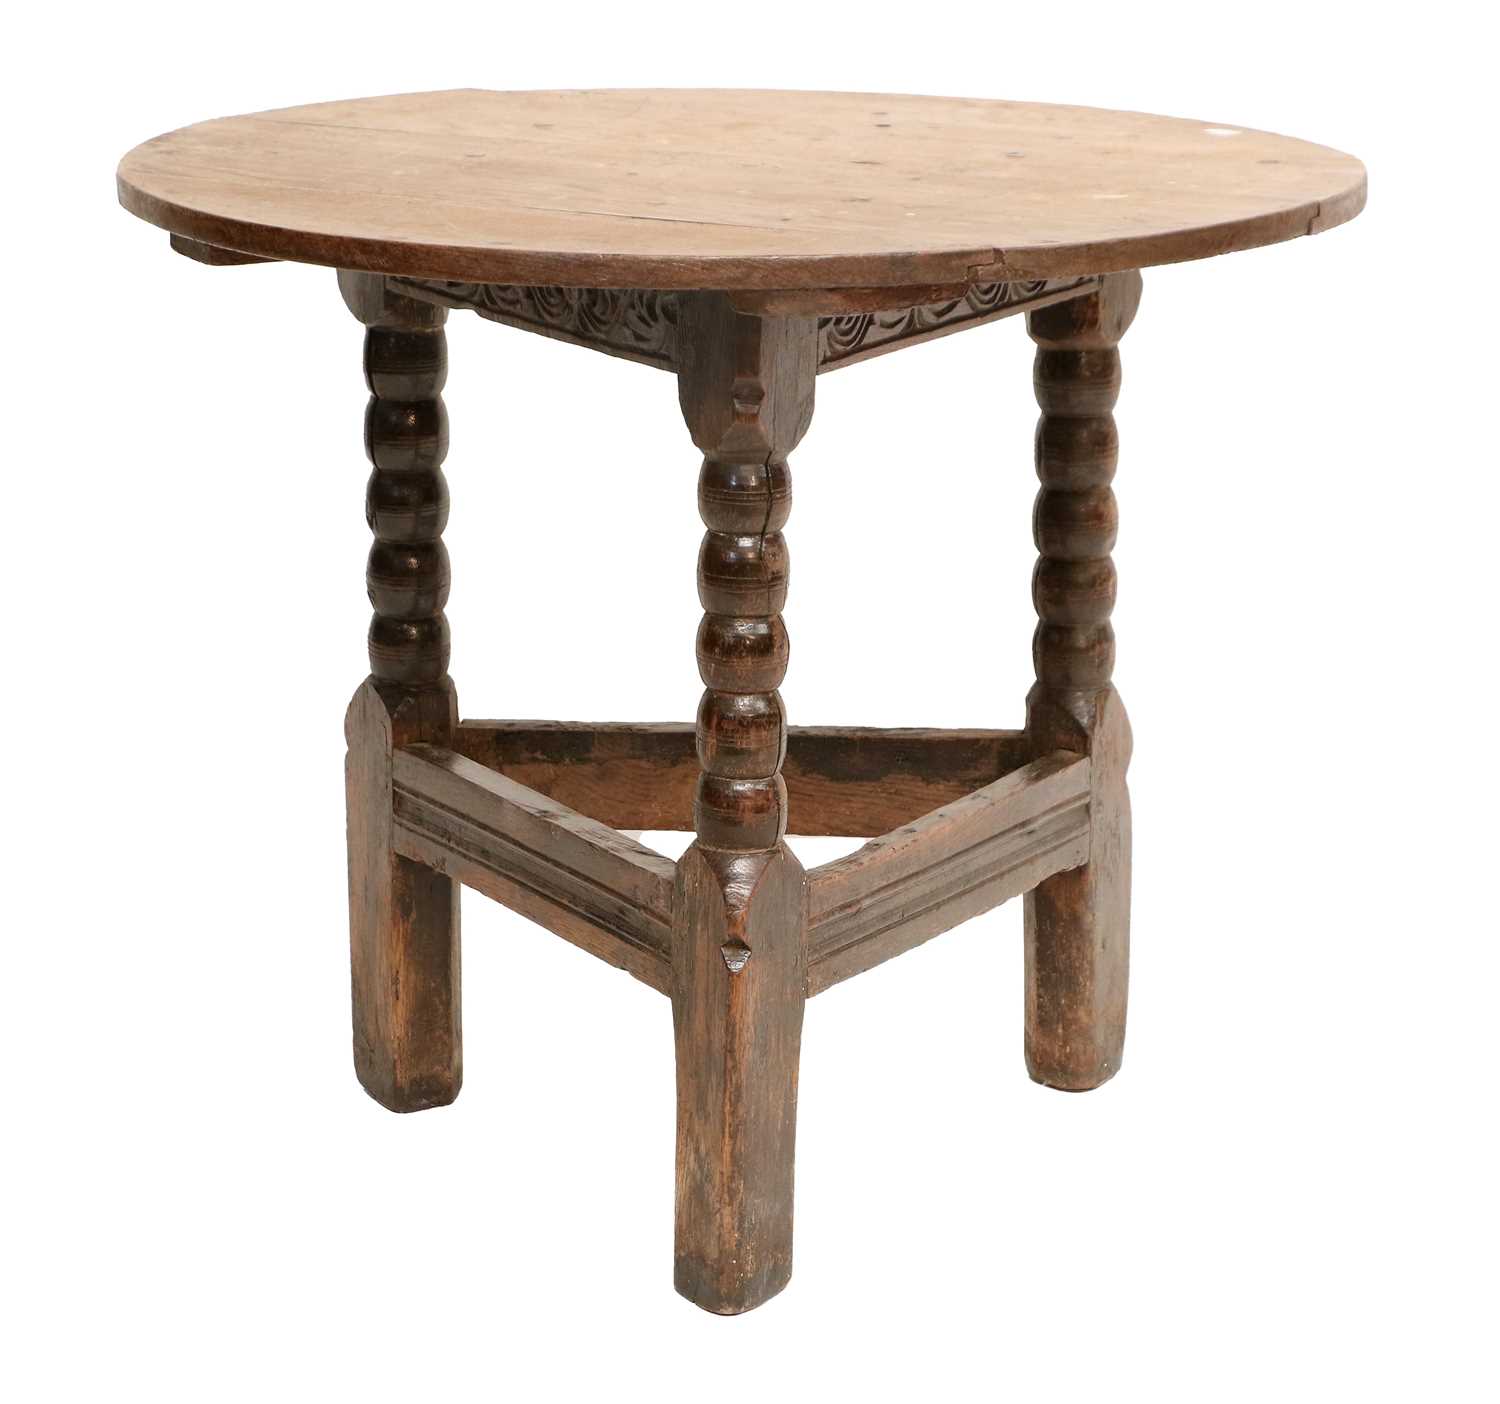 A Circular Oak Cricket Table, late 17th/early 18th century, of plank-top construction with carved